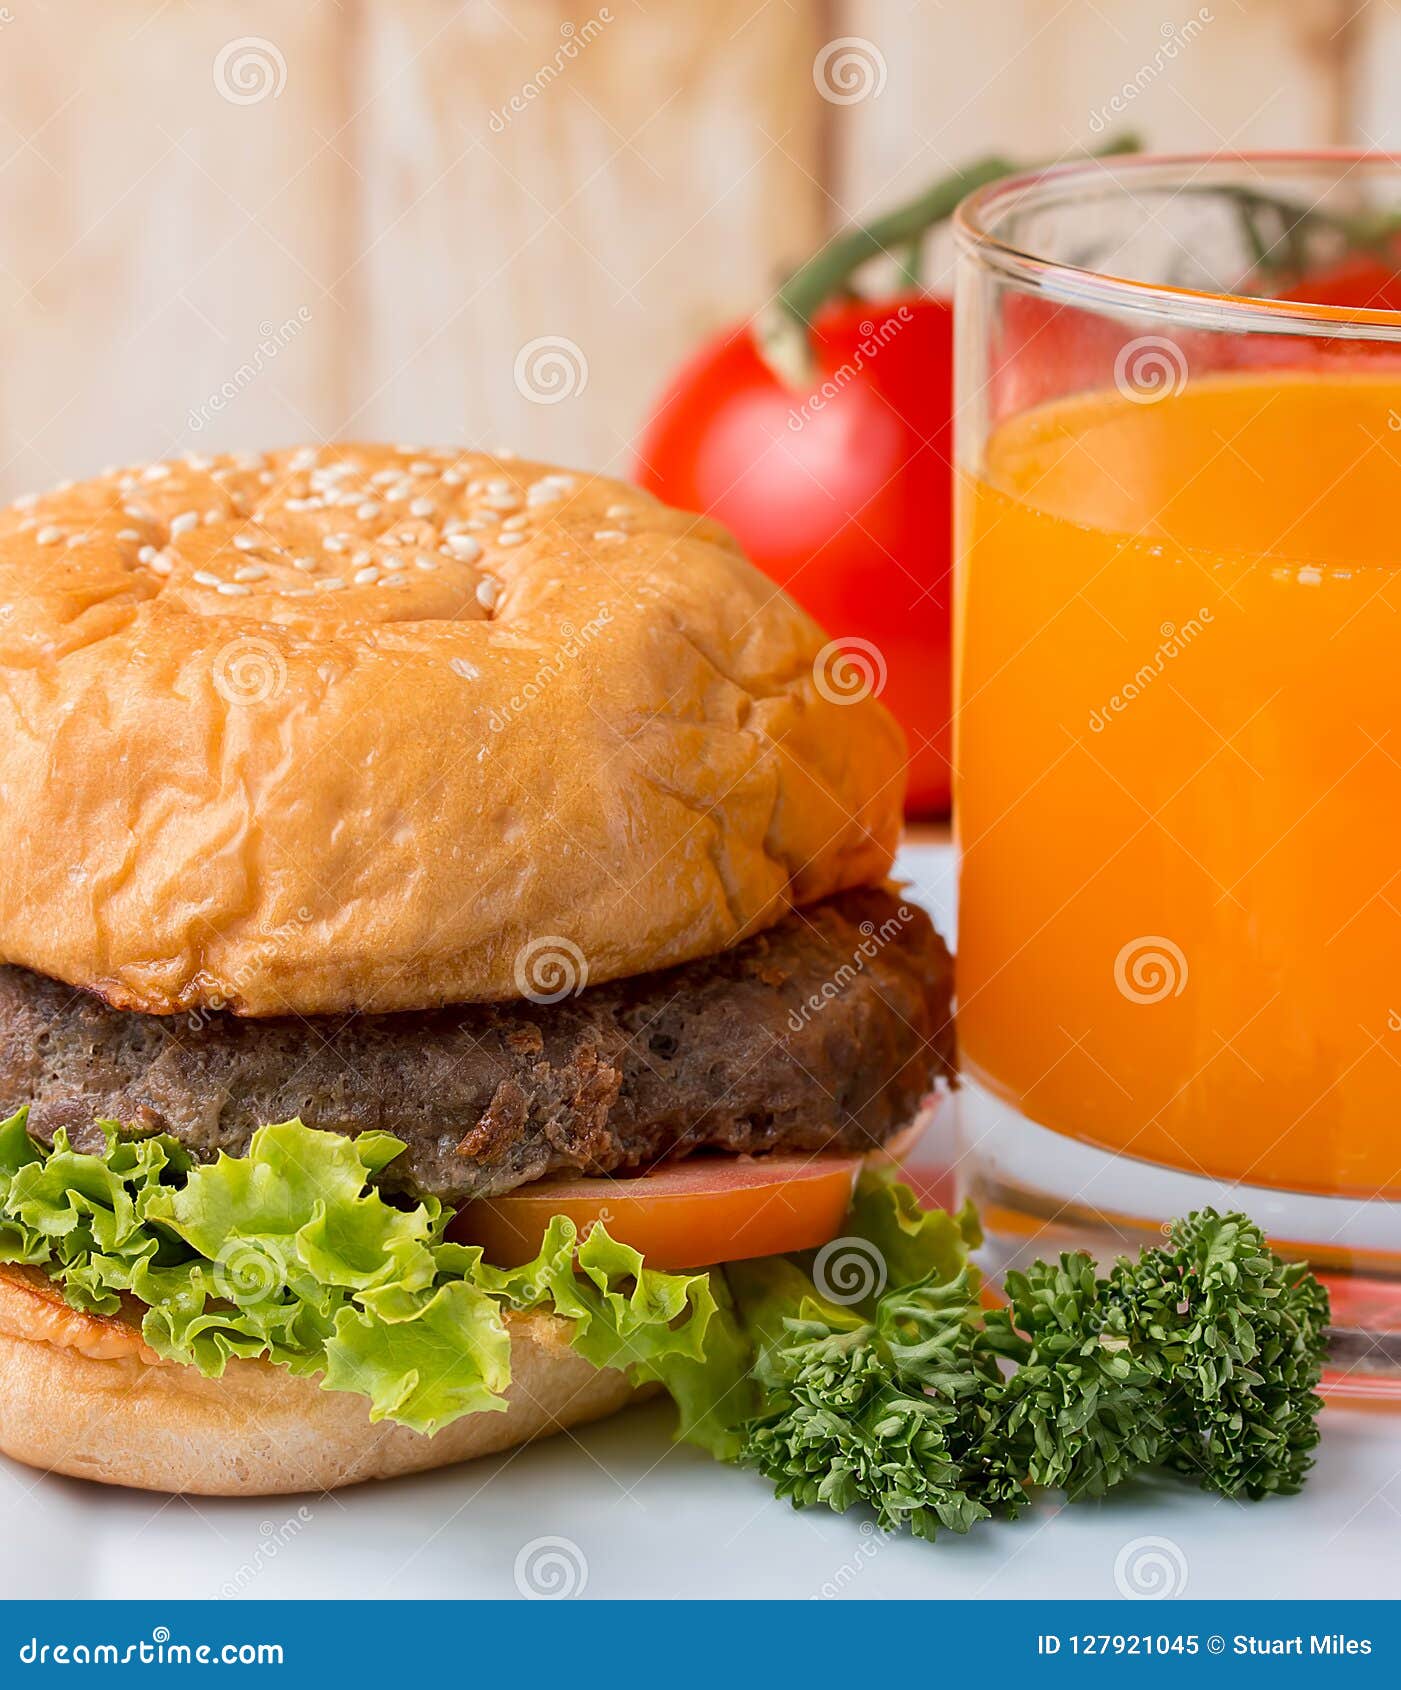 burger and juice shows quarter pounder and bbq